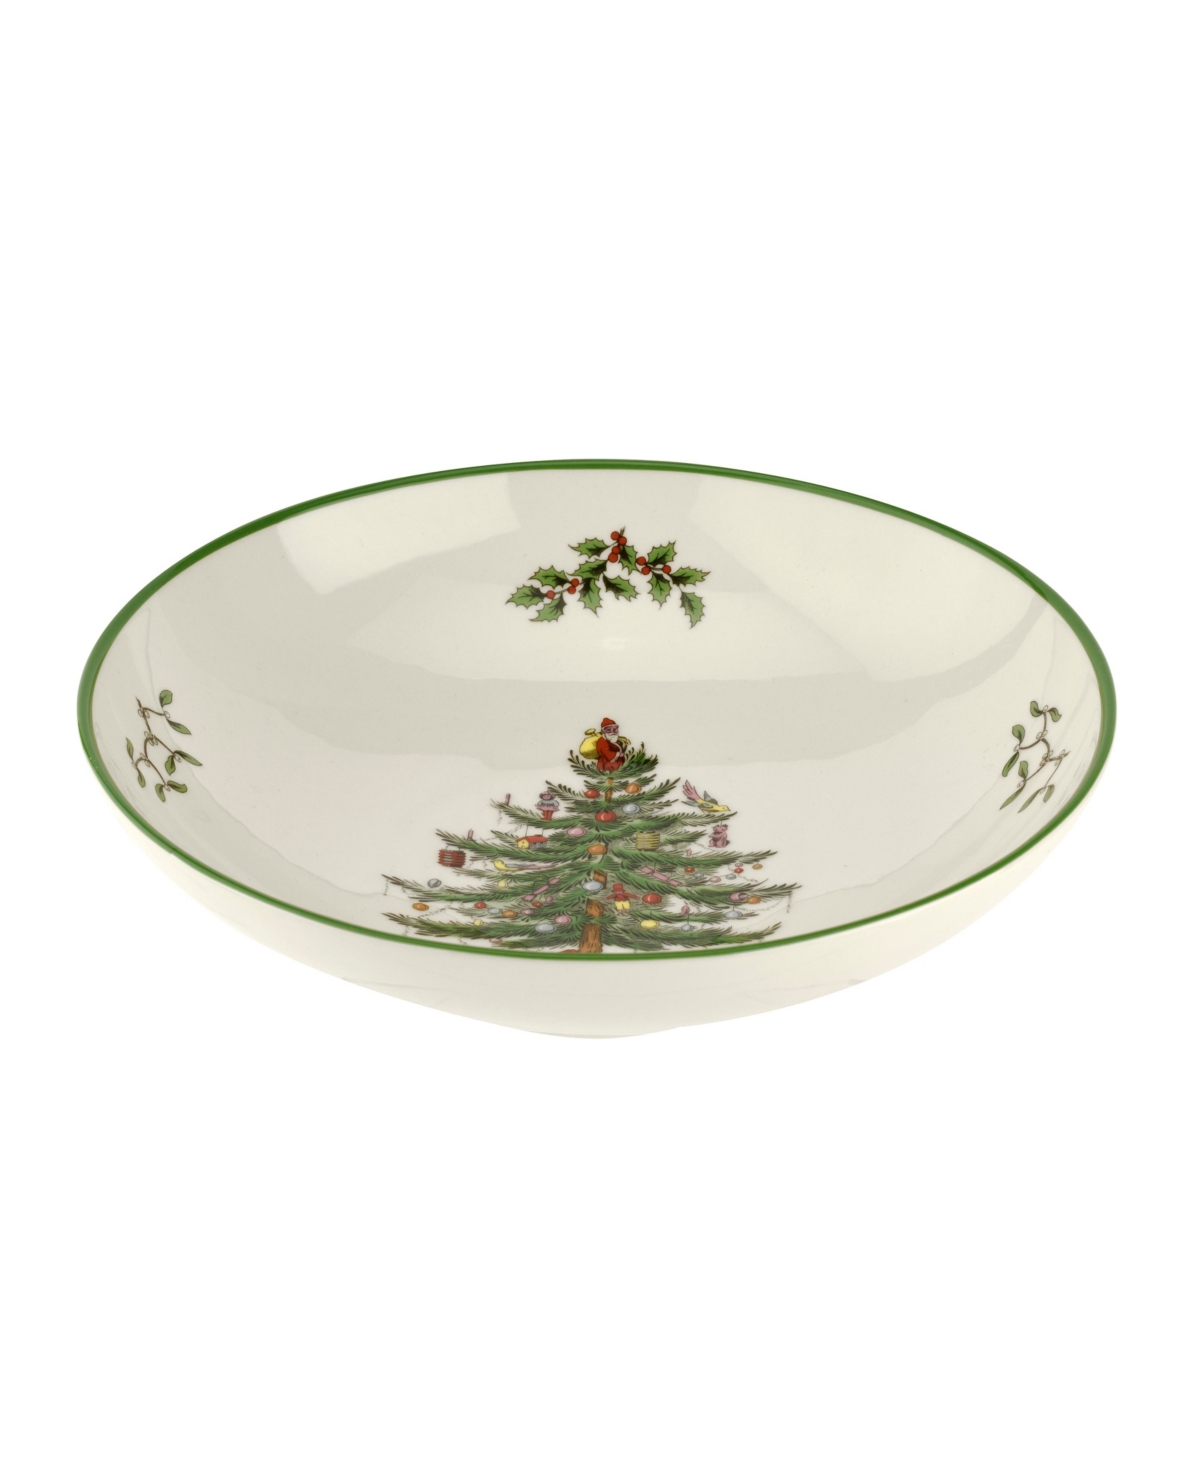 Spode Christmas Tree Small Pasta Bowl In Green